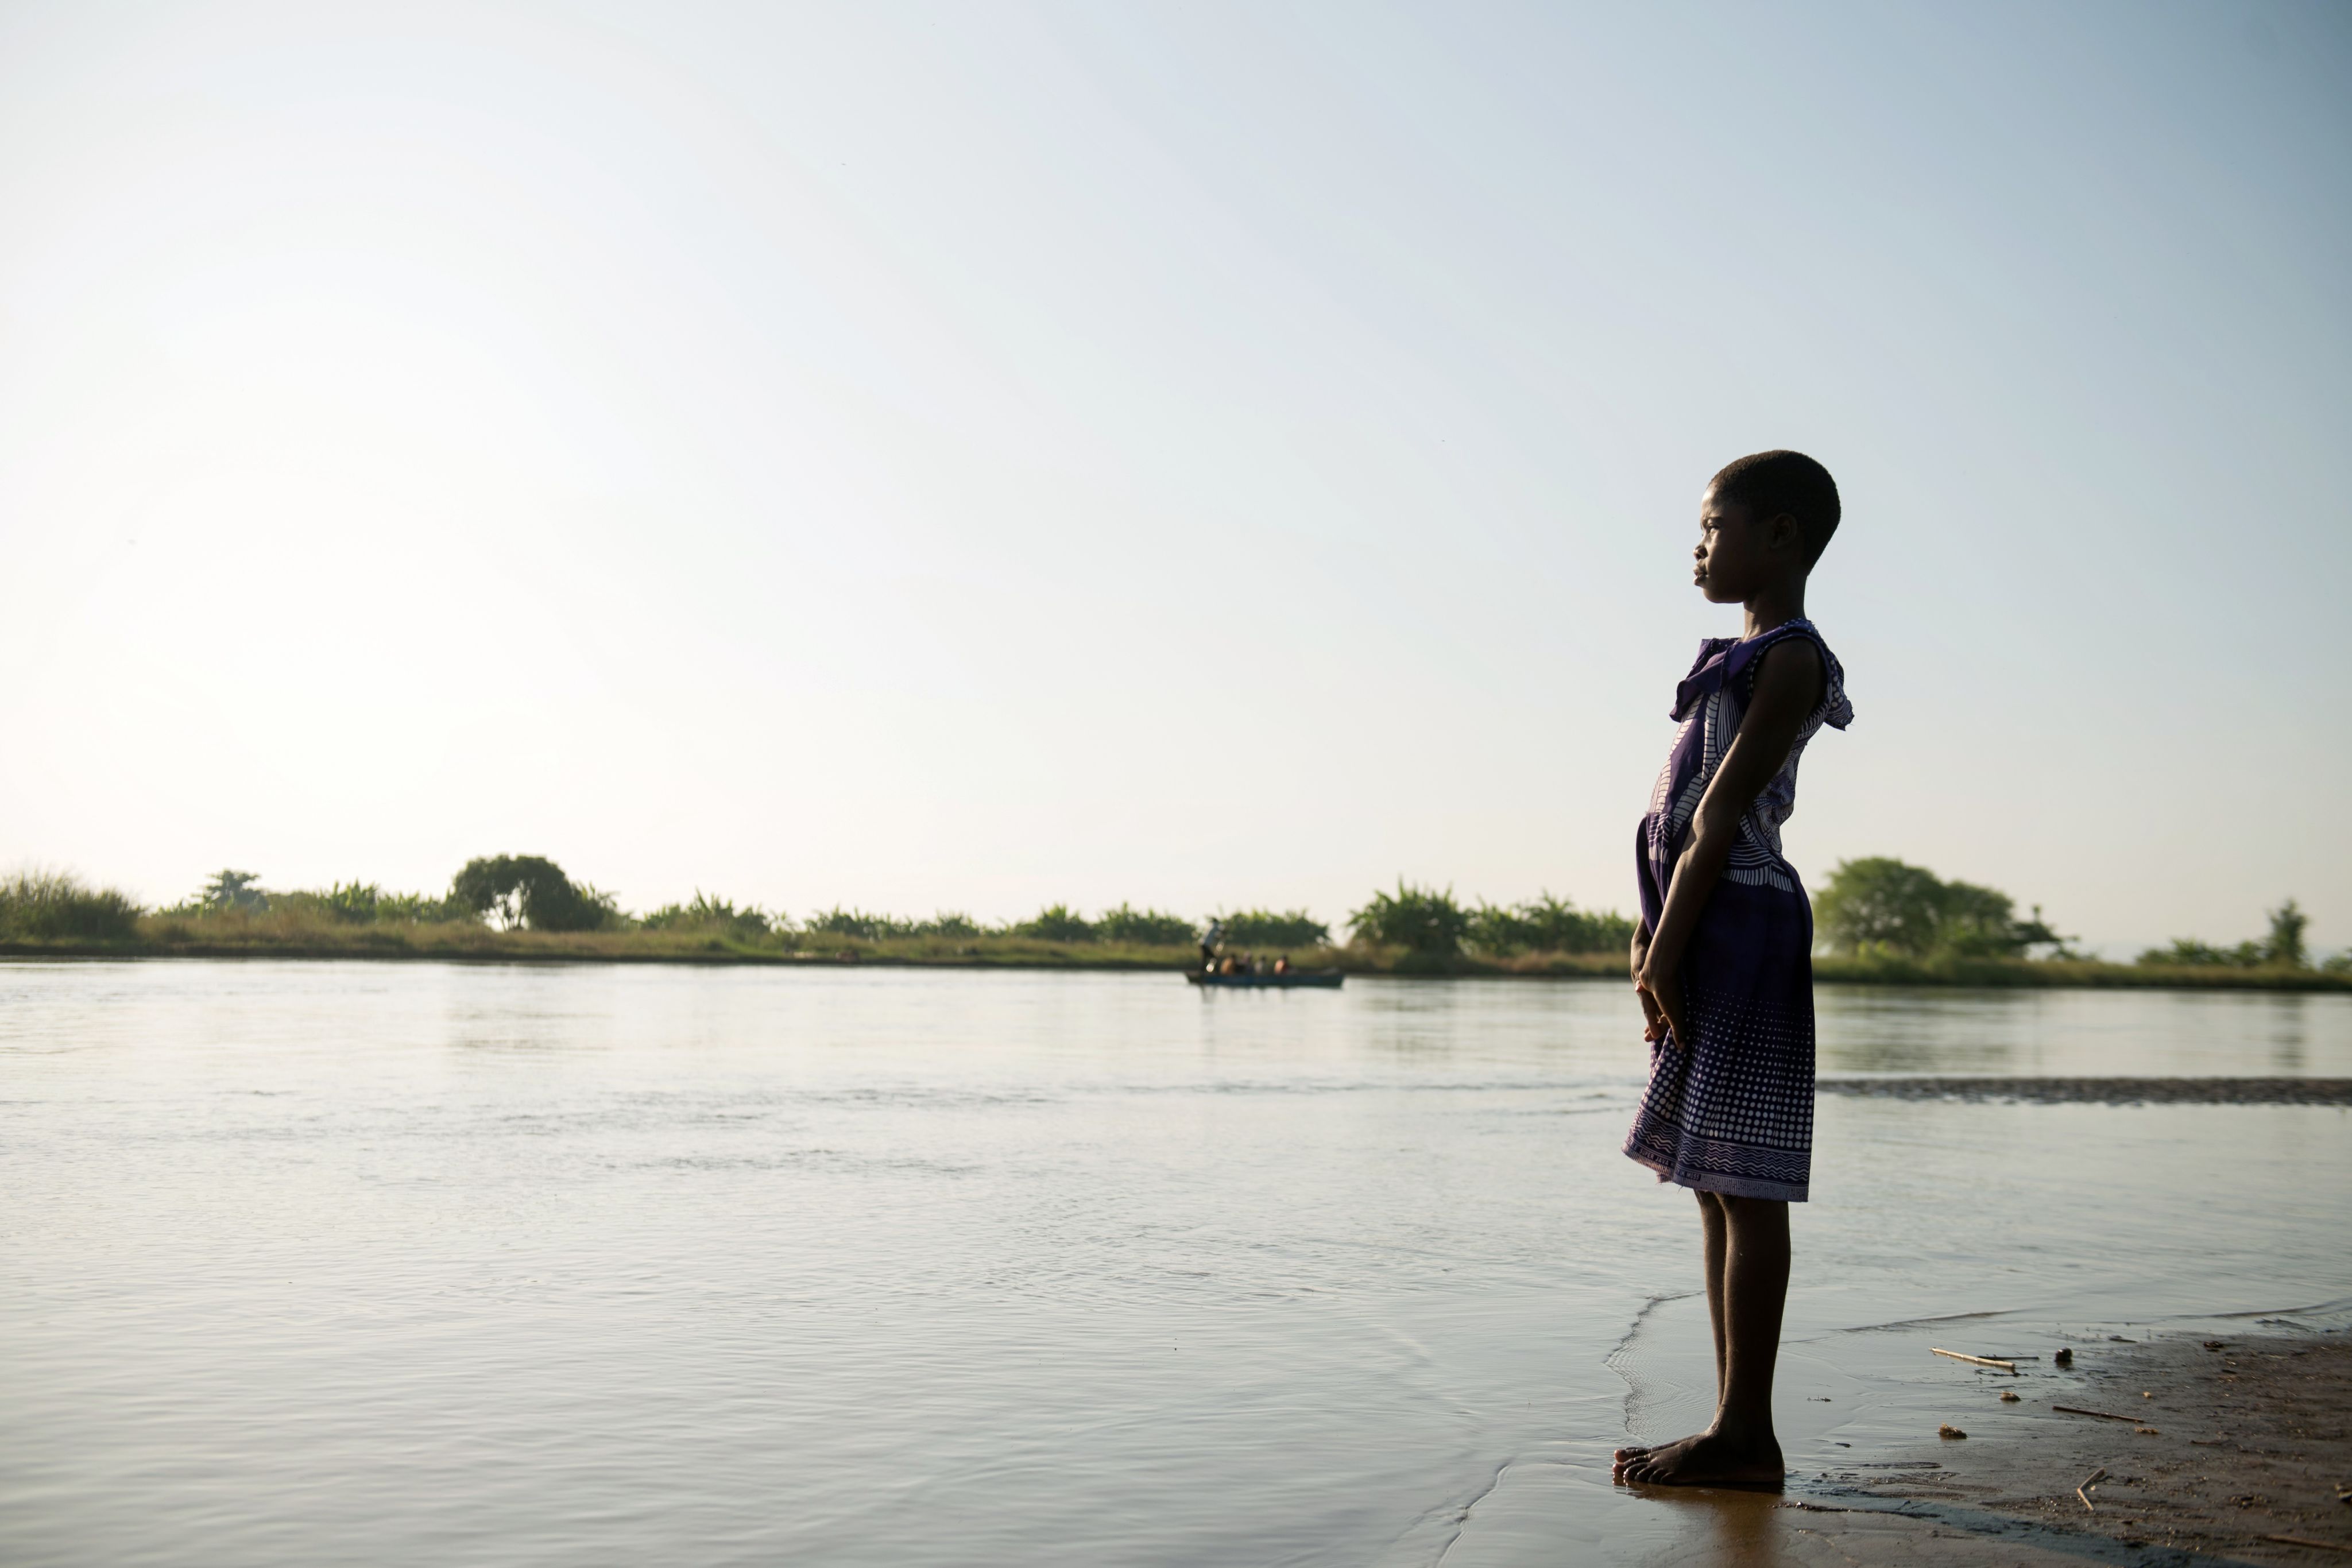 Sarah, 11, looking out over the Shira RIver that flooded her home, Malawi